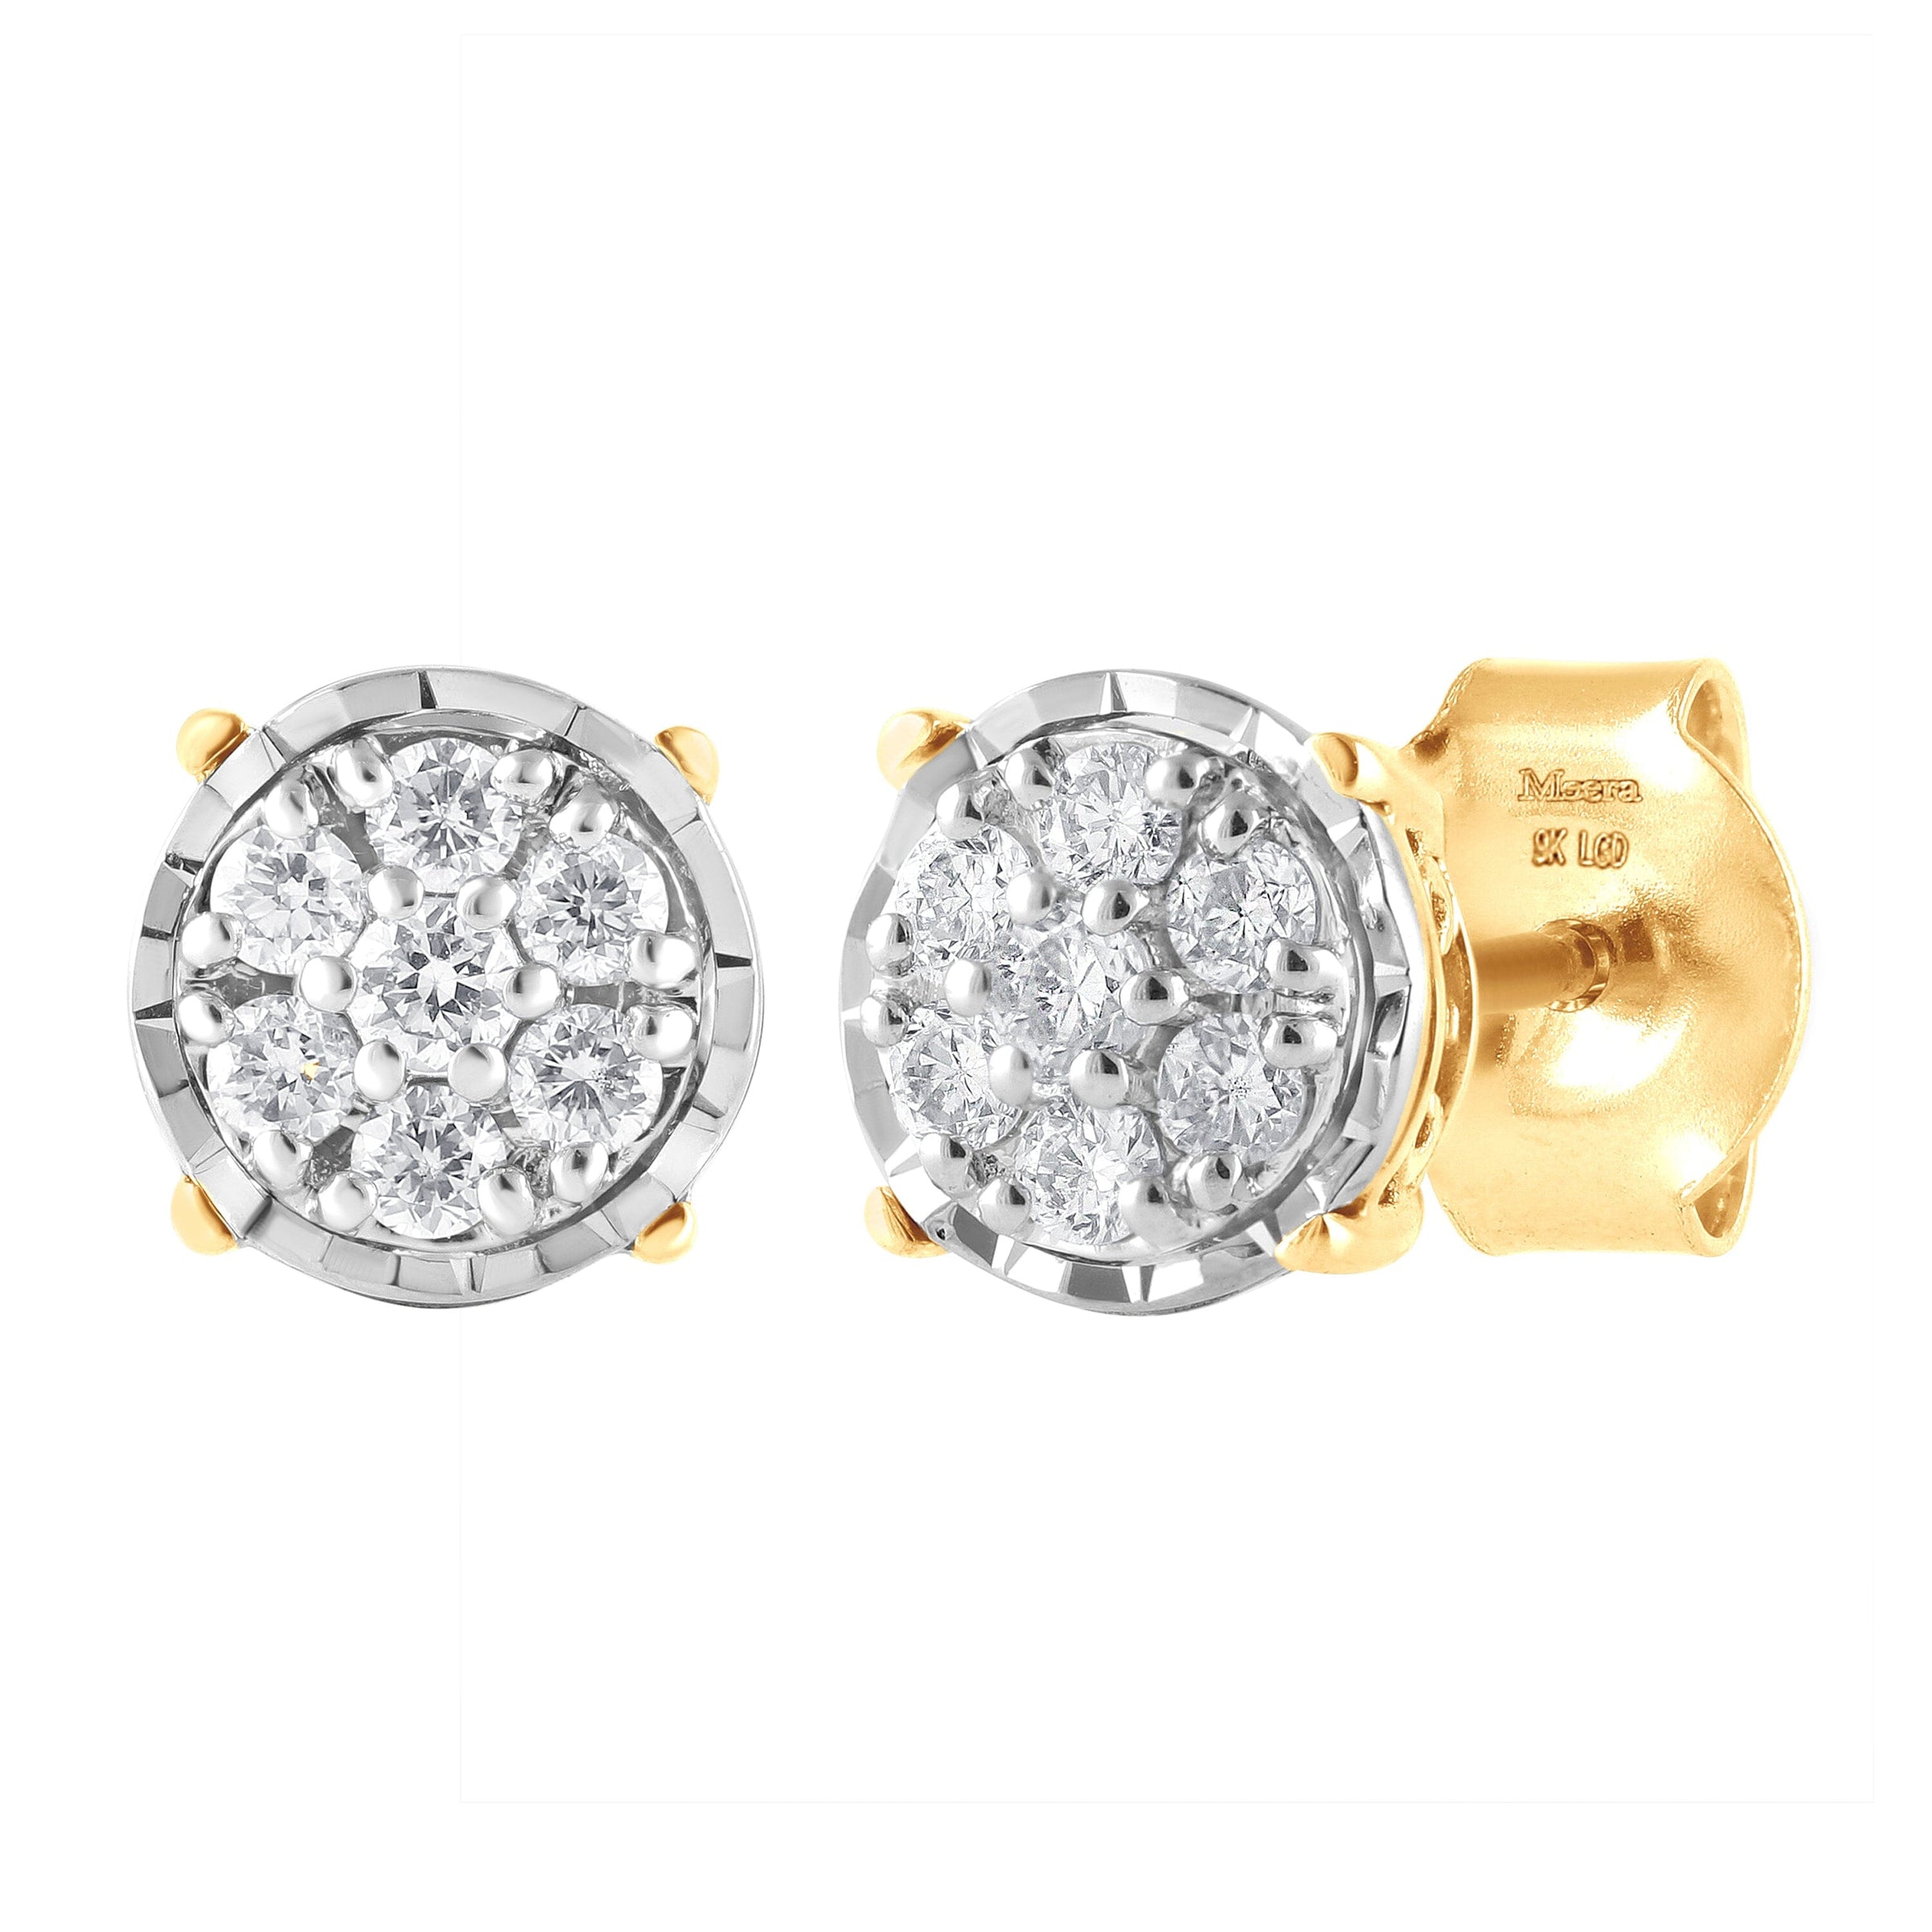 Meera Flower Earrings with 1/5ct of Laboratory Grown Diamonds in 9ct Yellow Gold Earrings Bevilles 